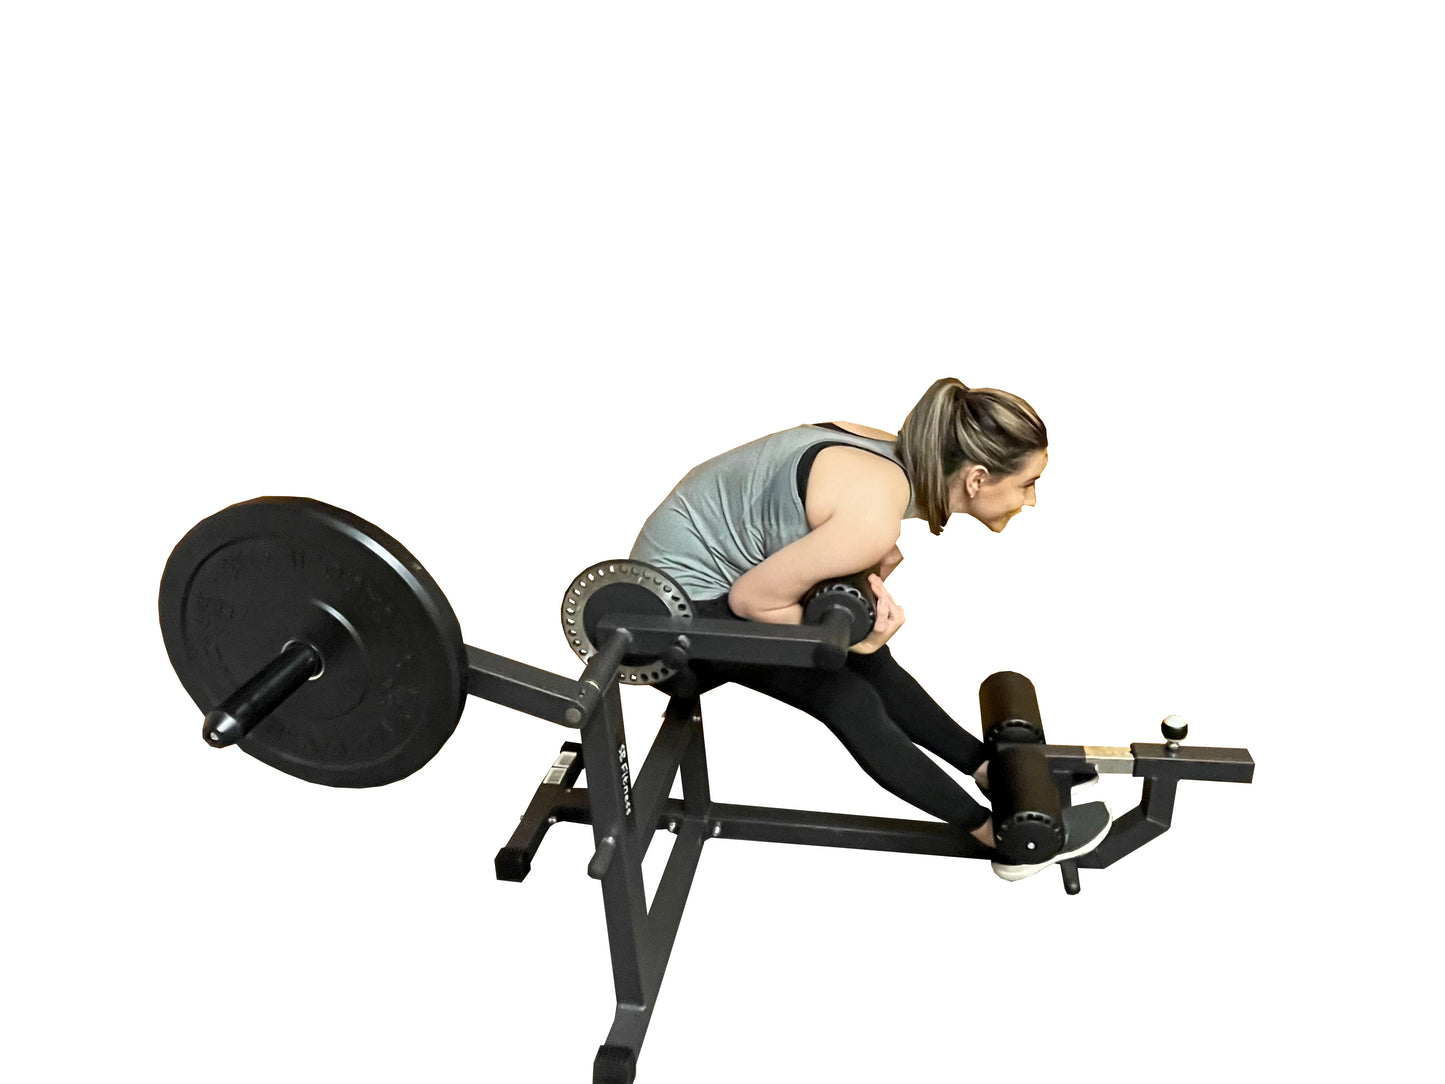 SB Fitness AB700 Commercial Abdominal and Back Extension Combo